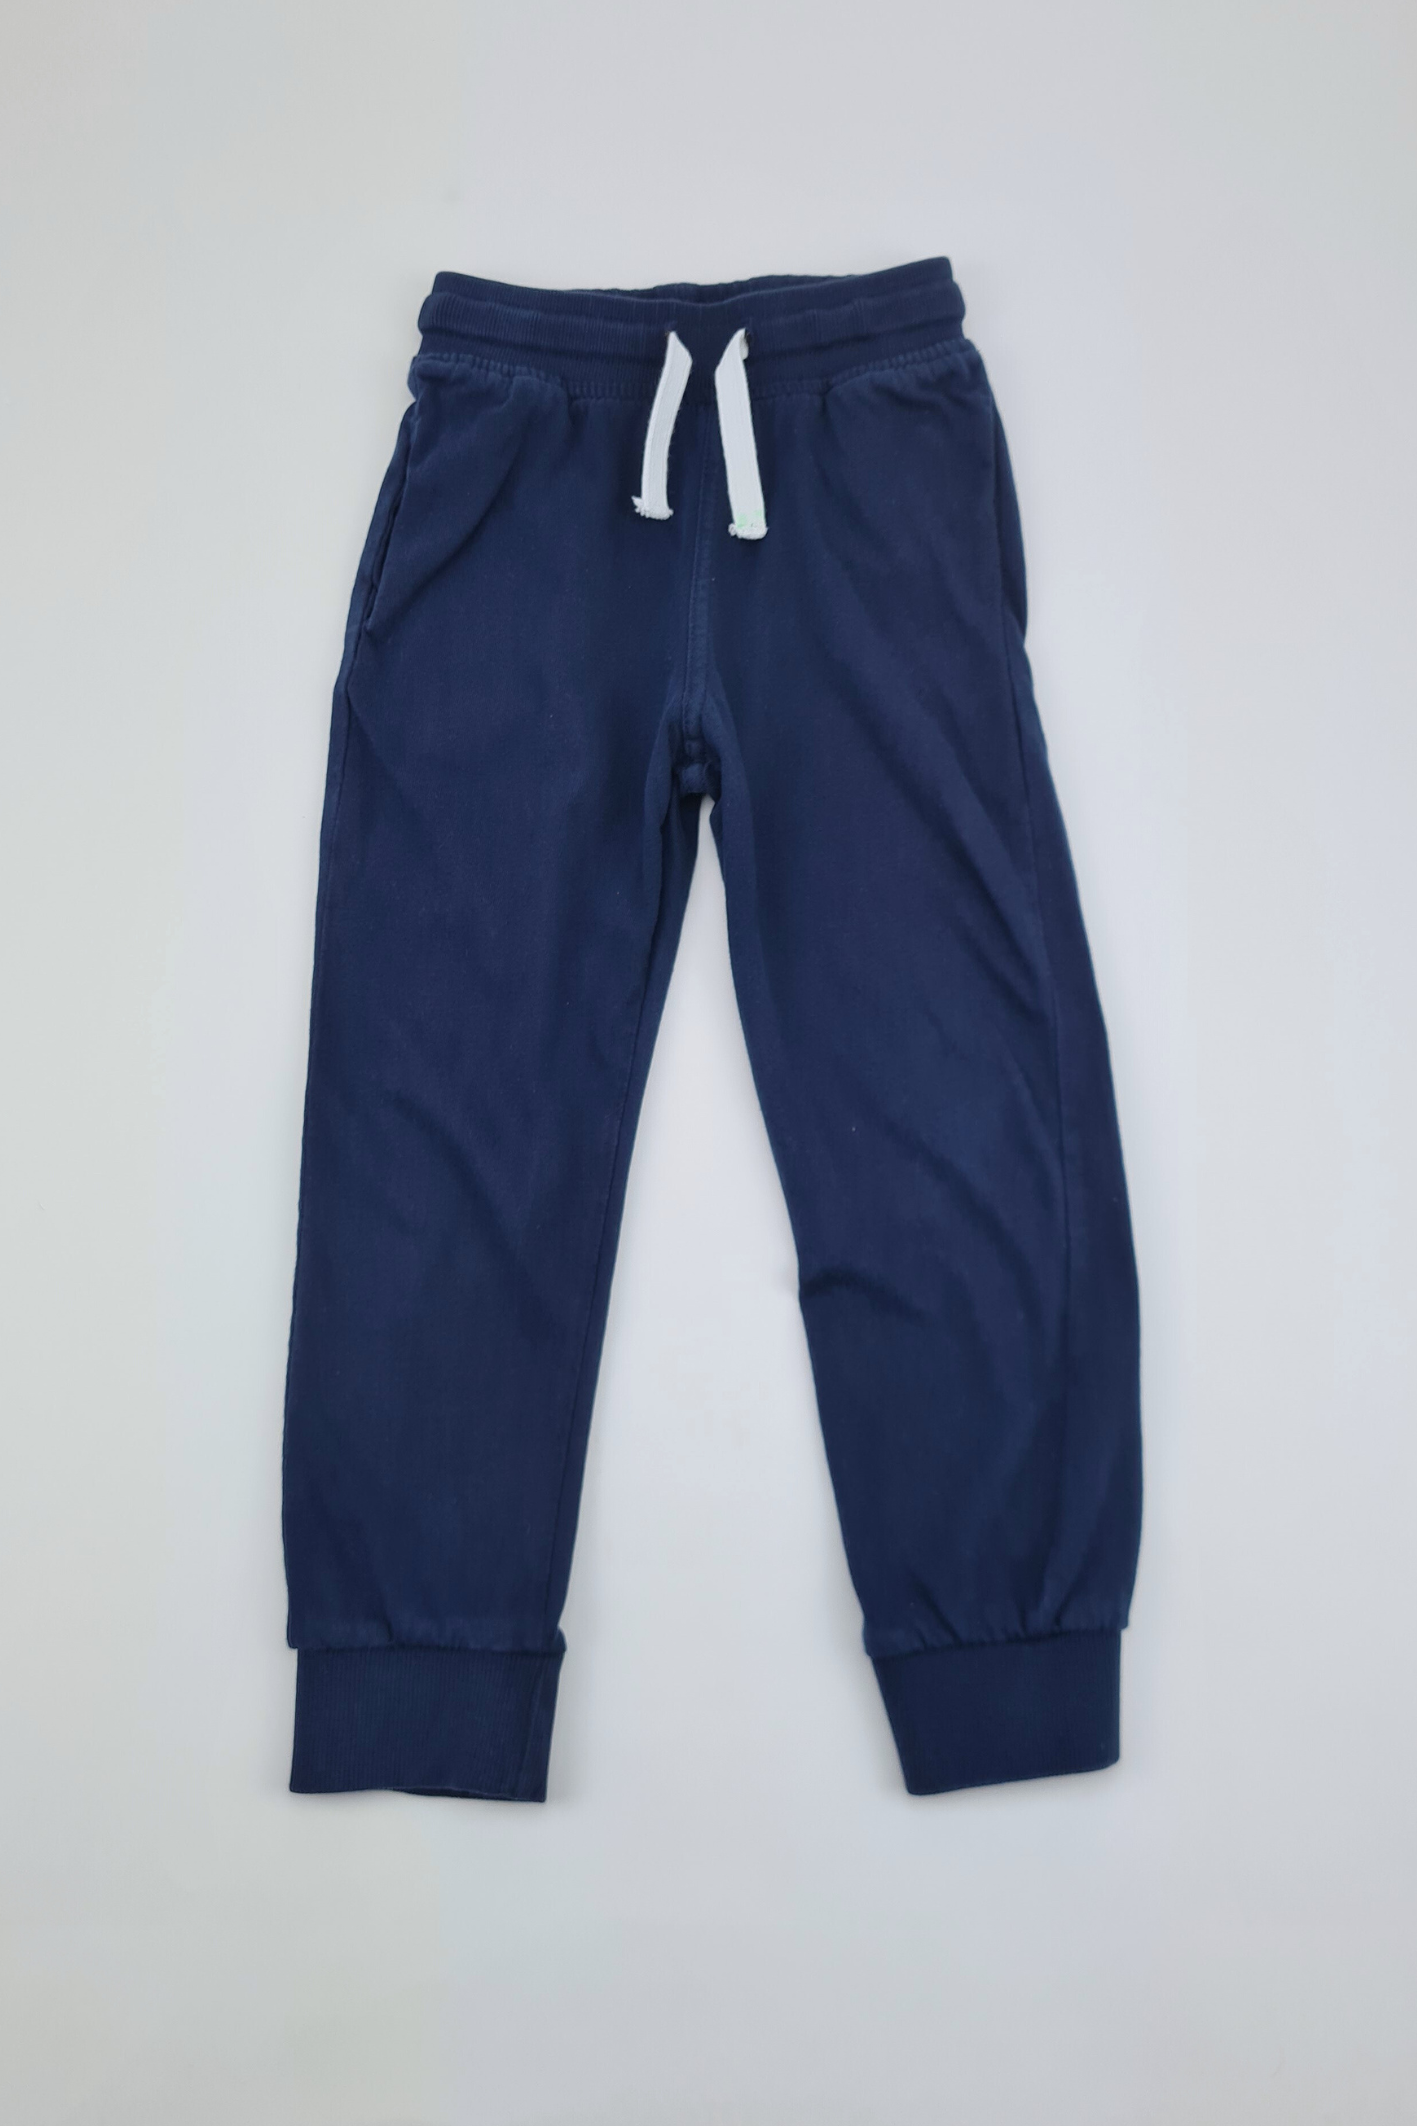 3y - Navy Blue Joggers (H&M)